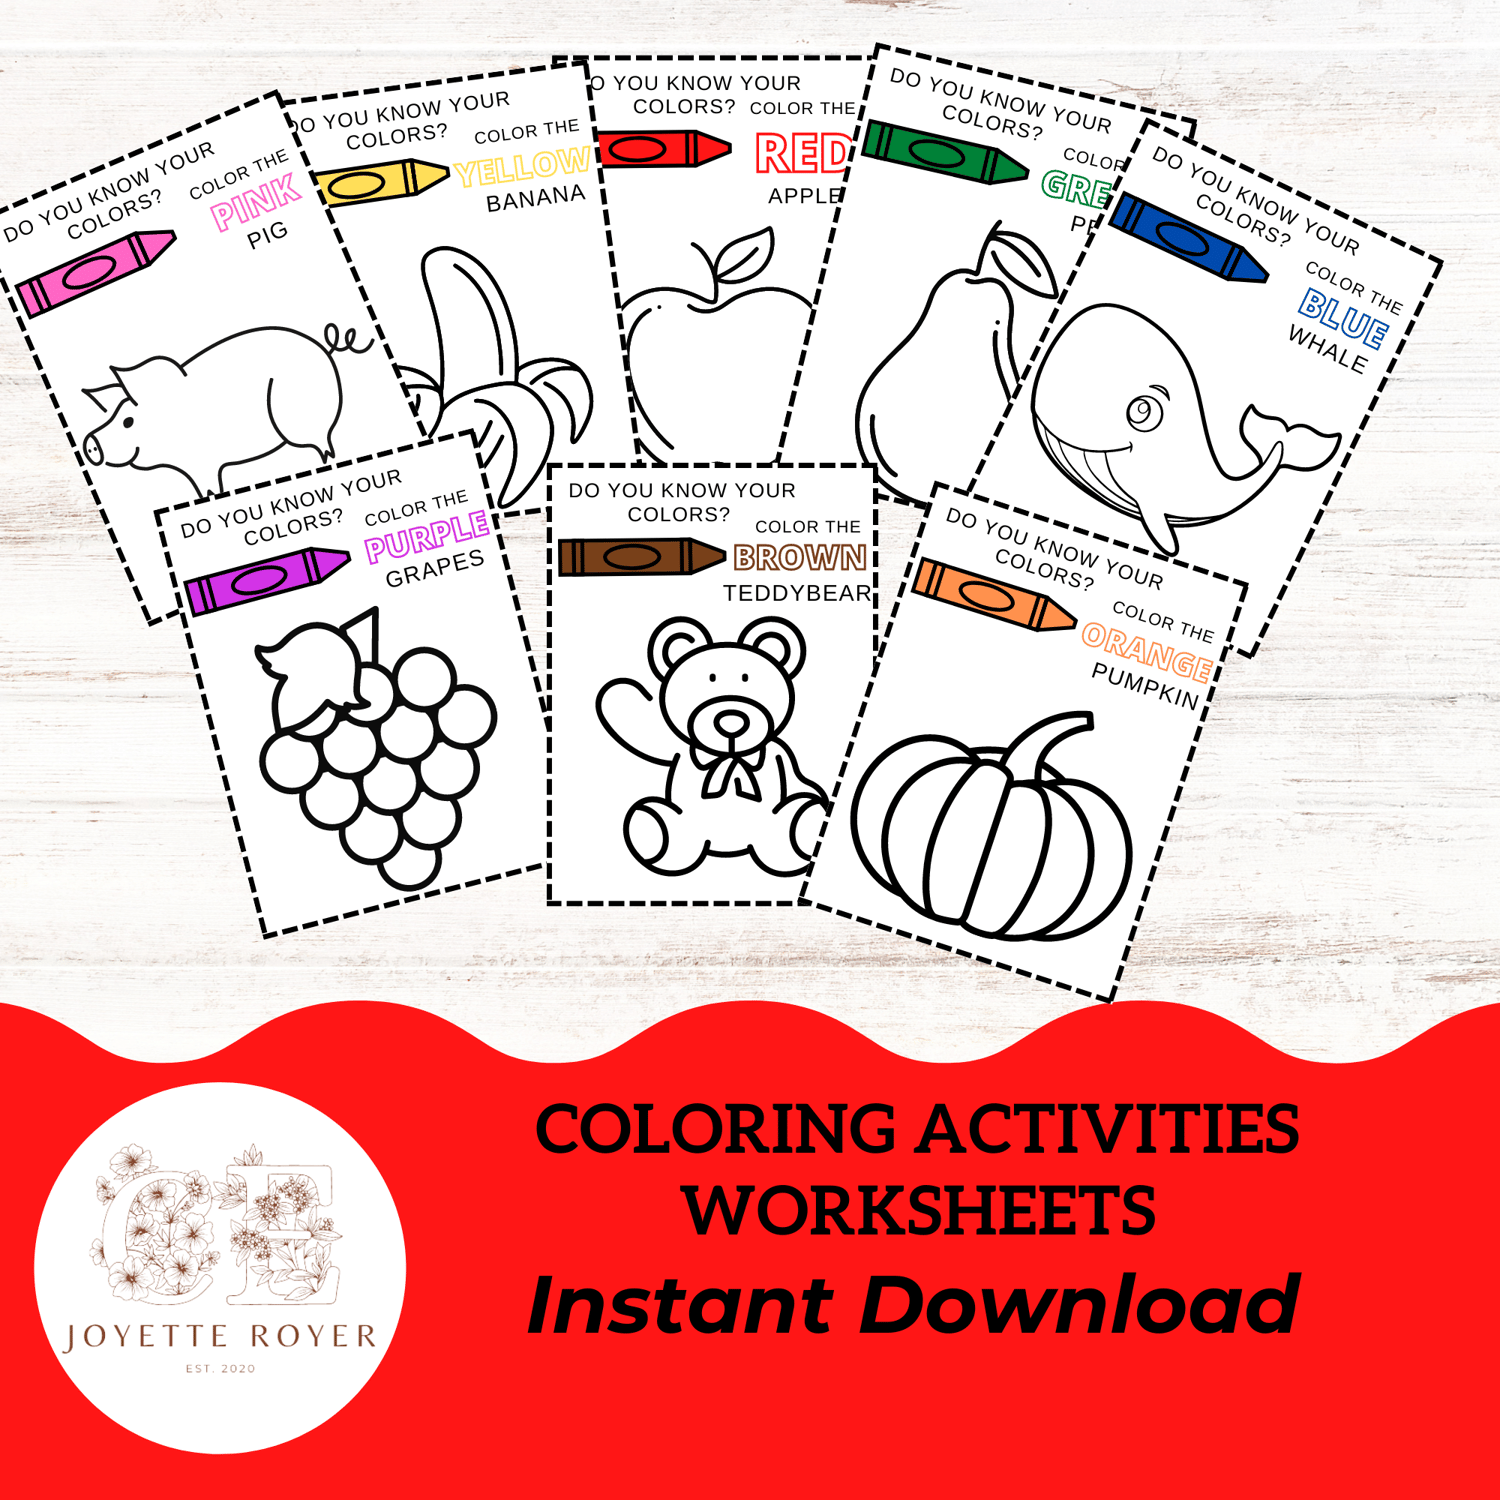 Coloring activities worksheets printable preschool color worksheets kids activities preschool learning instant download